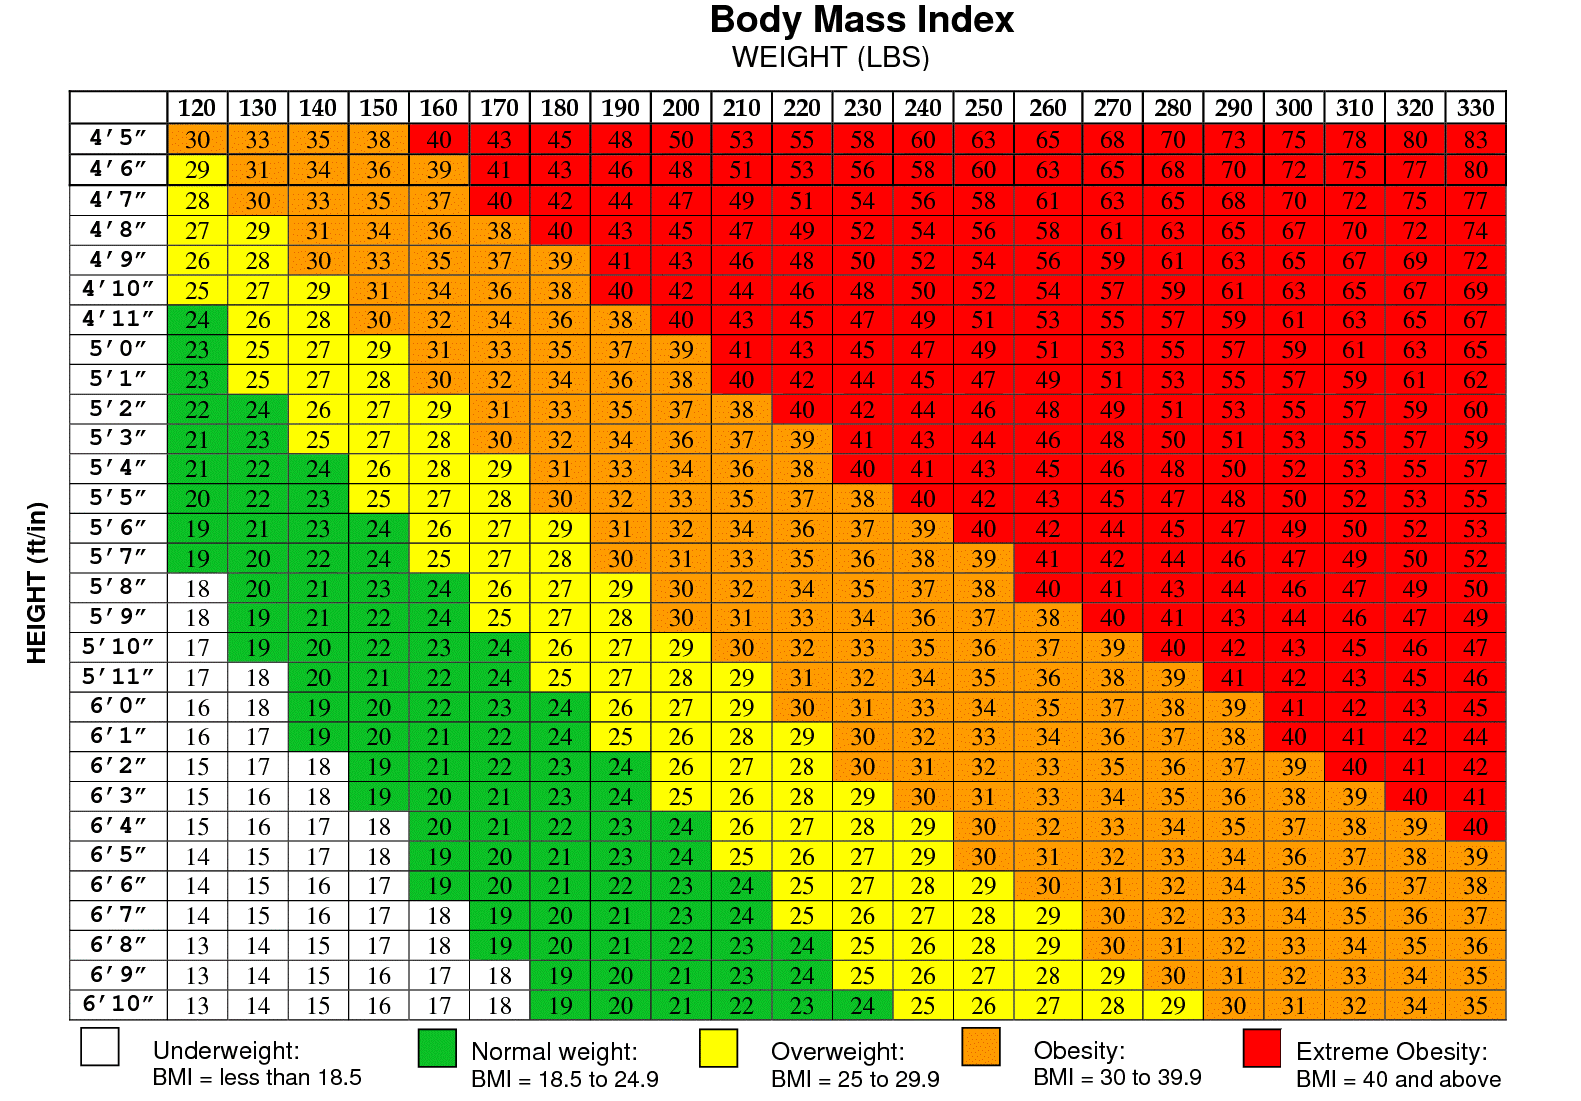 Truth About Bmi Charts